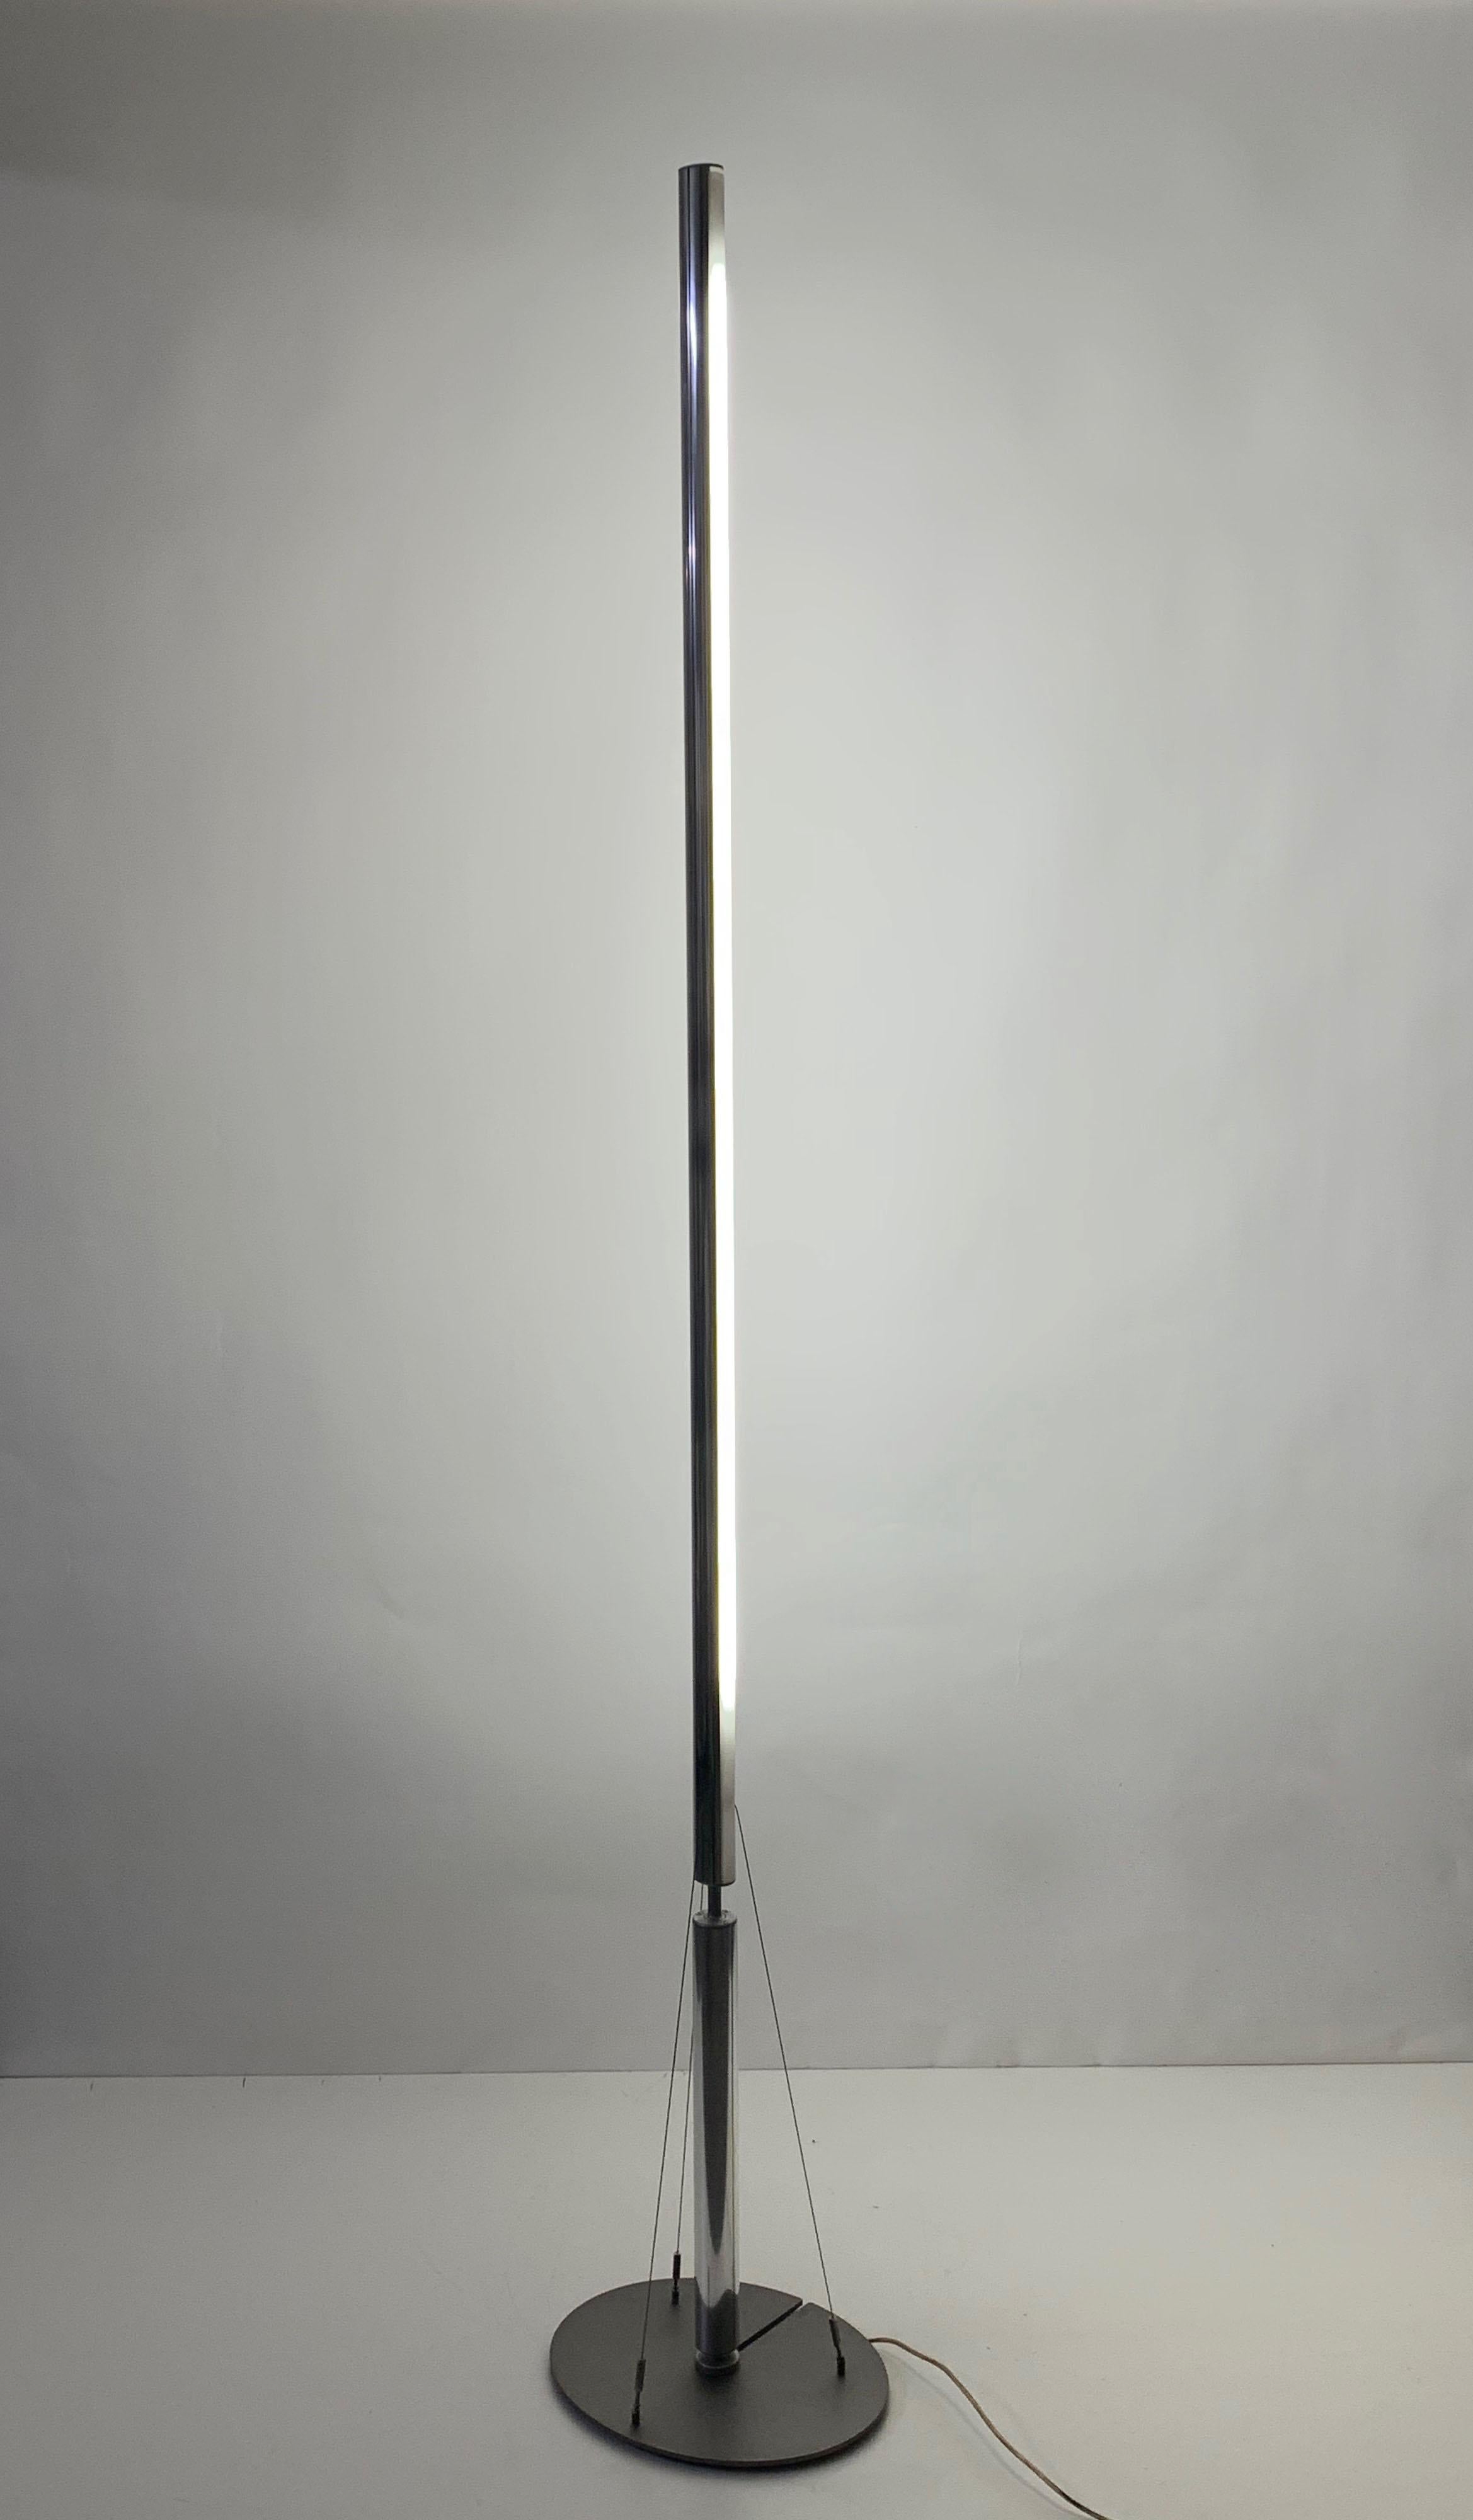 Fassina & Forcolini Midcentury Chrome Floor Lamp for Italiana Luce, Italy, 1980s In Good Condition For Sale In Roma, IT